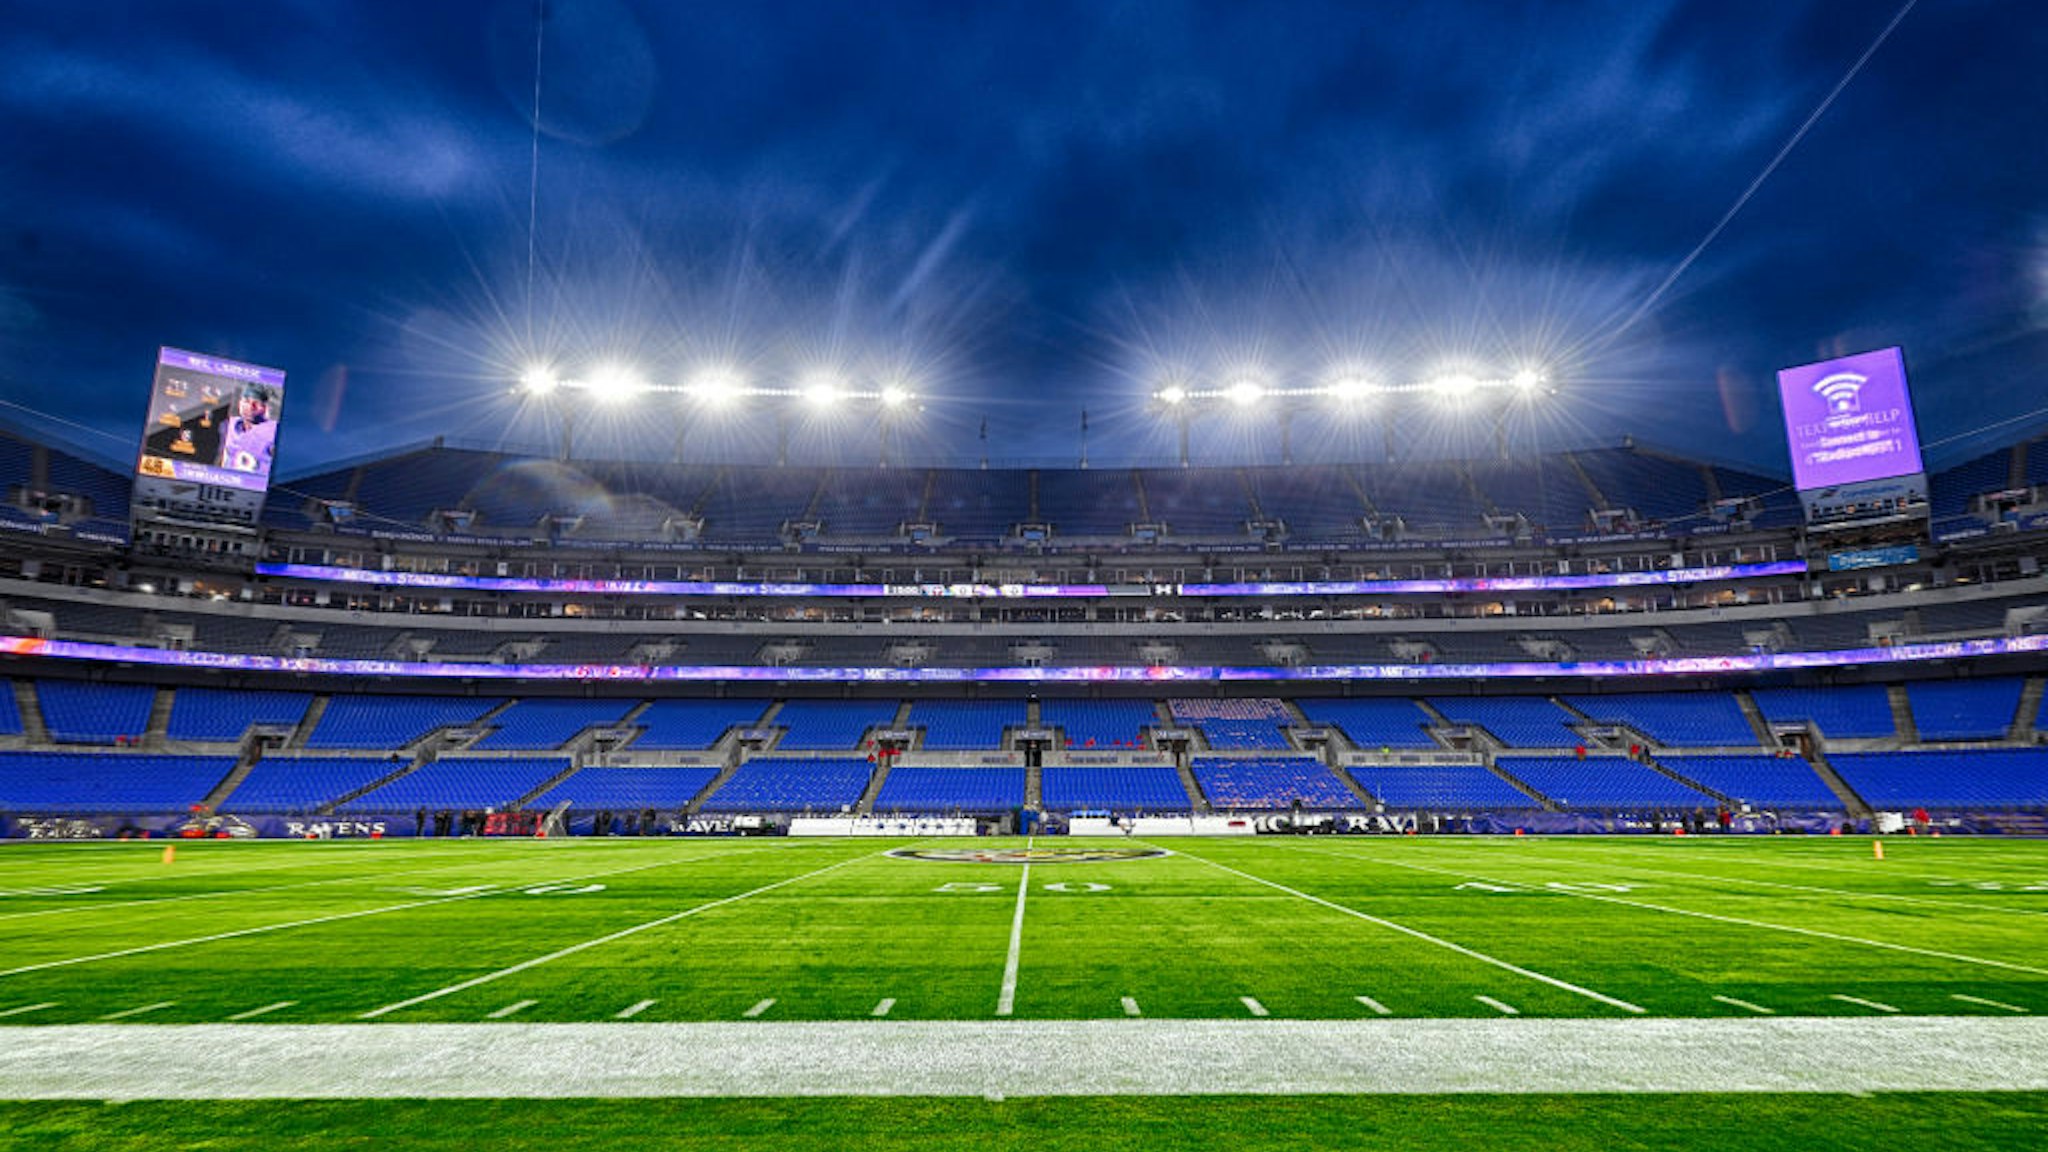 BALTIMORE, MD - JANUARY 11: A 21 frame composite high dynamic range (HDR) image taken on January 11, 2020, of M&amp;T Bank Stadium in Baltimore, MD. prior to the AFC Divisional Playoff between the Tennessee Titans and the Baltimore Ravens.